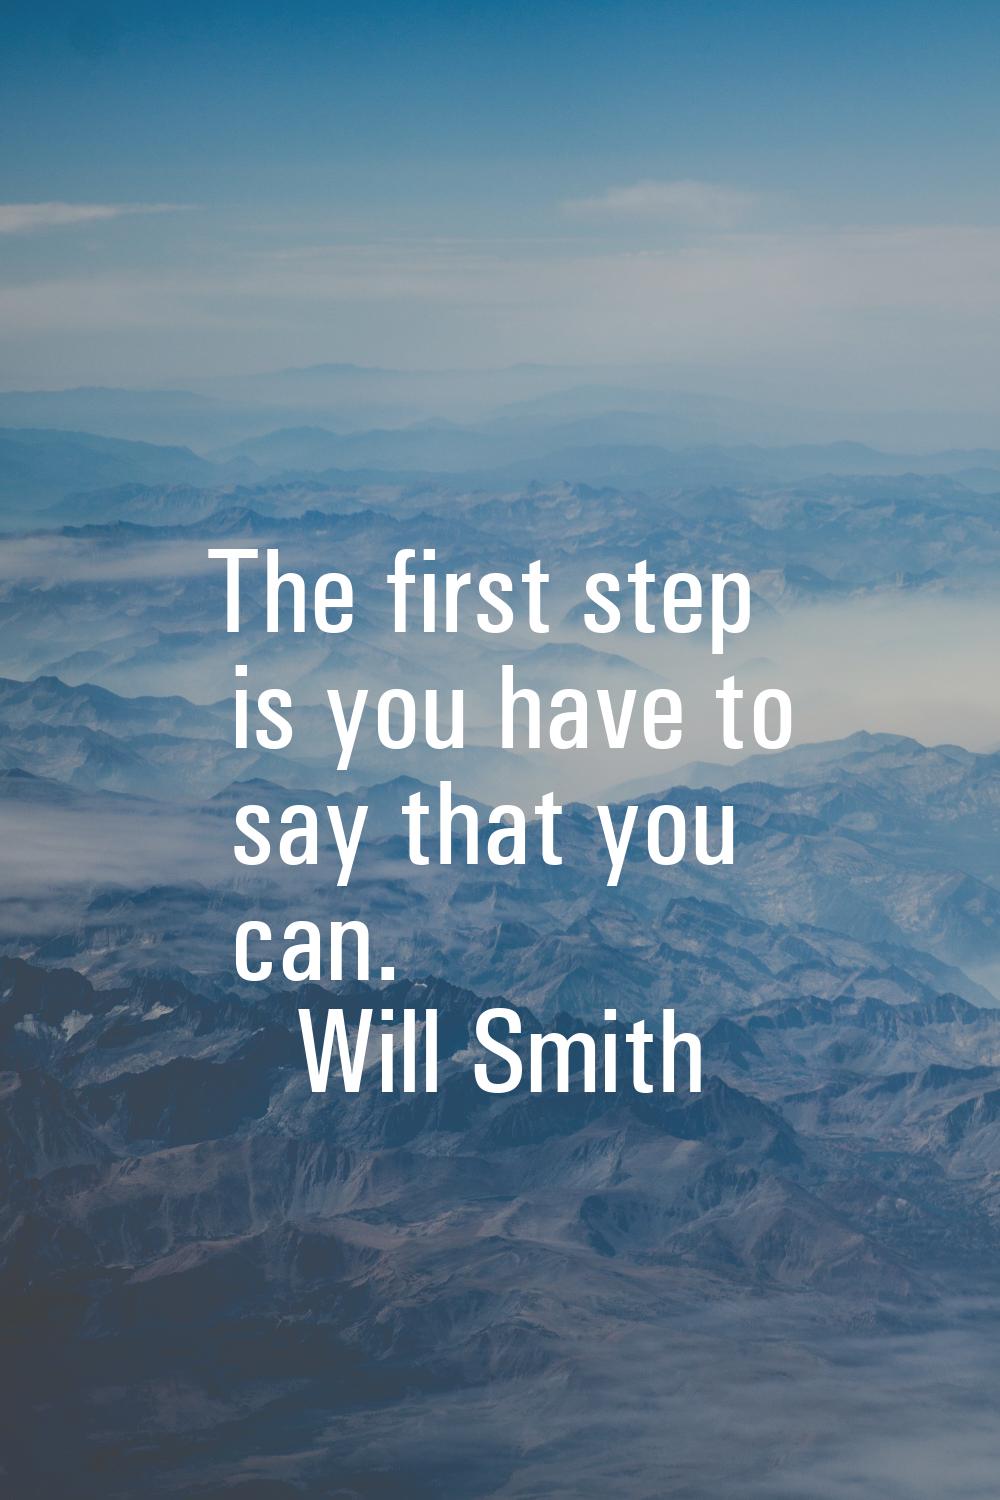 The first step is you have to say that you can.